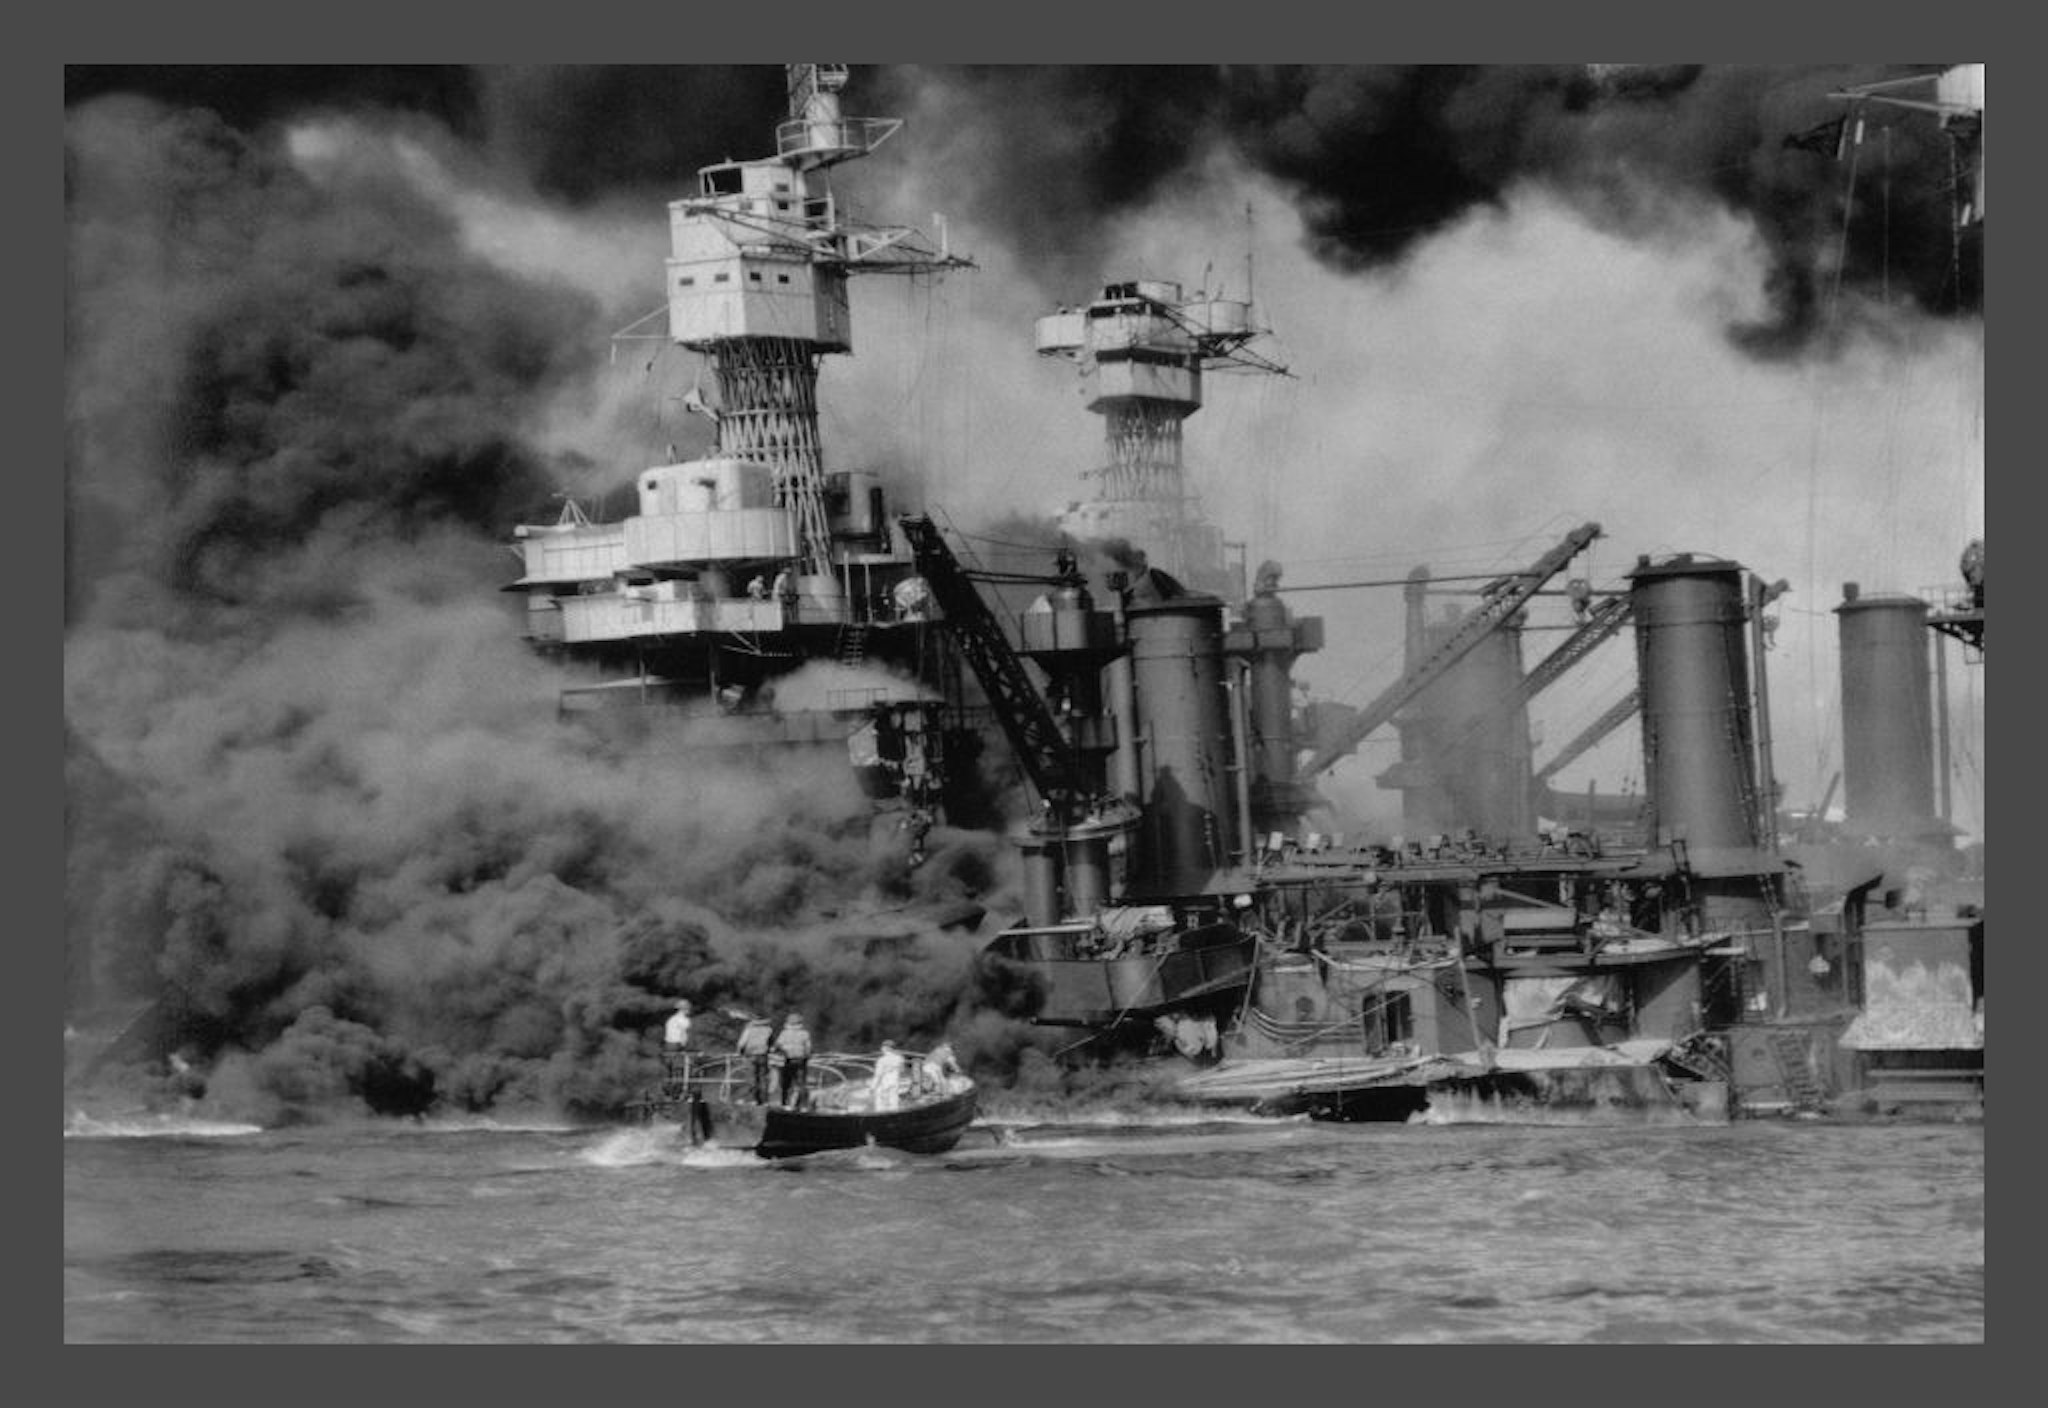 UNITED STATES - CIRCA 1941: On December 7, 1941 the Japanese attacked Pearl Habor in Hawaii. In one attack they sunk almost the entire Pacific Fleet. This photograph shows the USS West Virginia on fire and the upper part of the USS Tenessee, already under the water. (Photo by Buyenlarge/Getty Images)